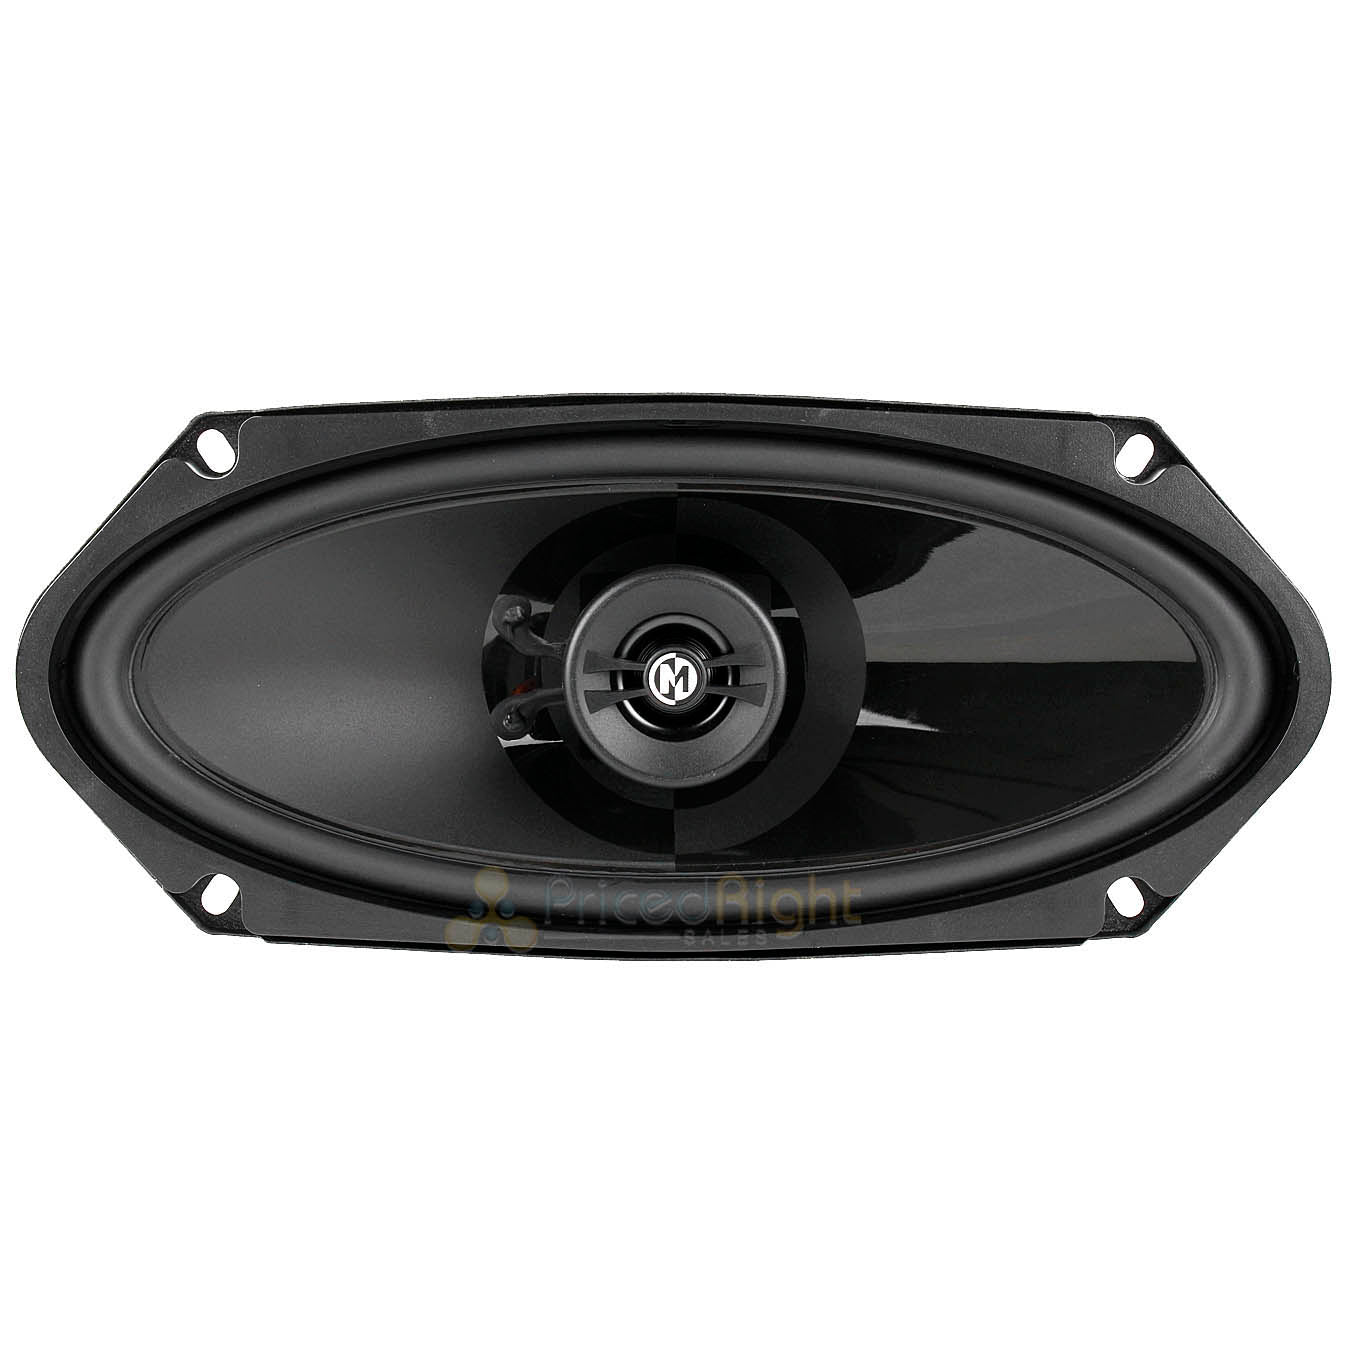 Memphis Audio 4x10" 2 Way Coaxial Speakers 100 Watts Max Power Reference PRX410